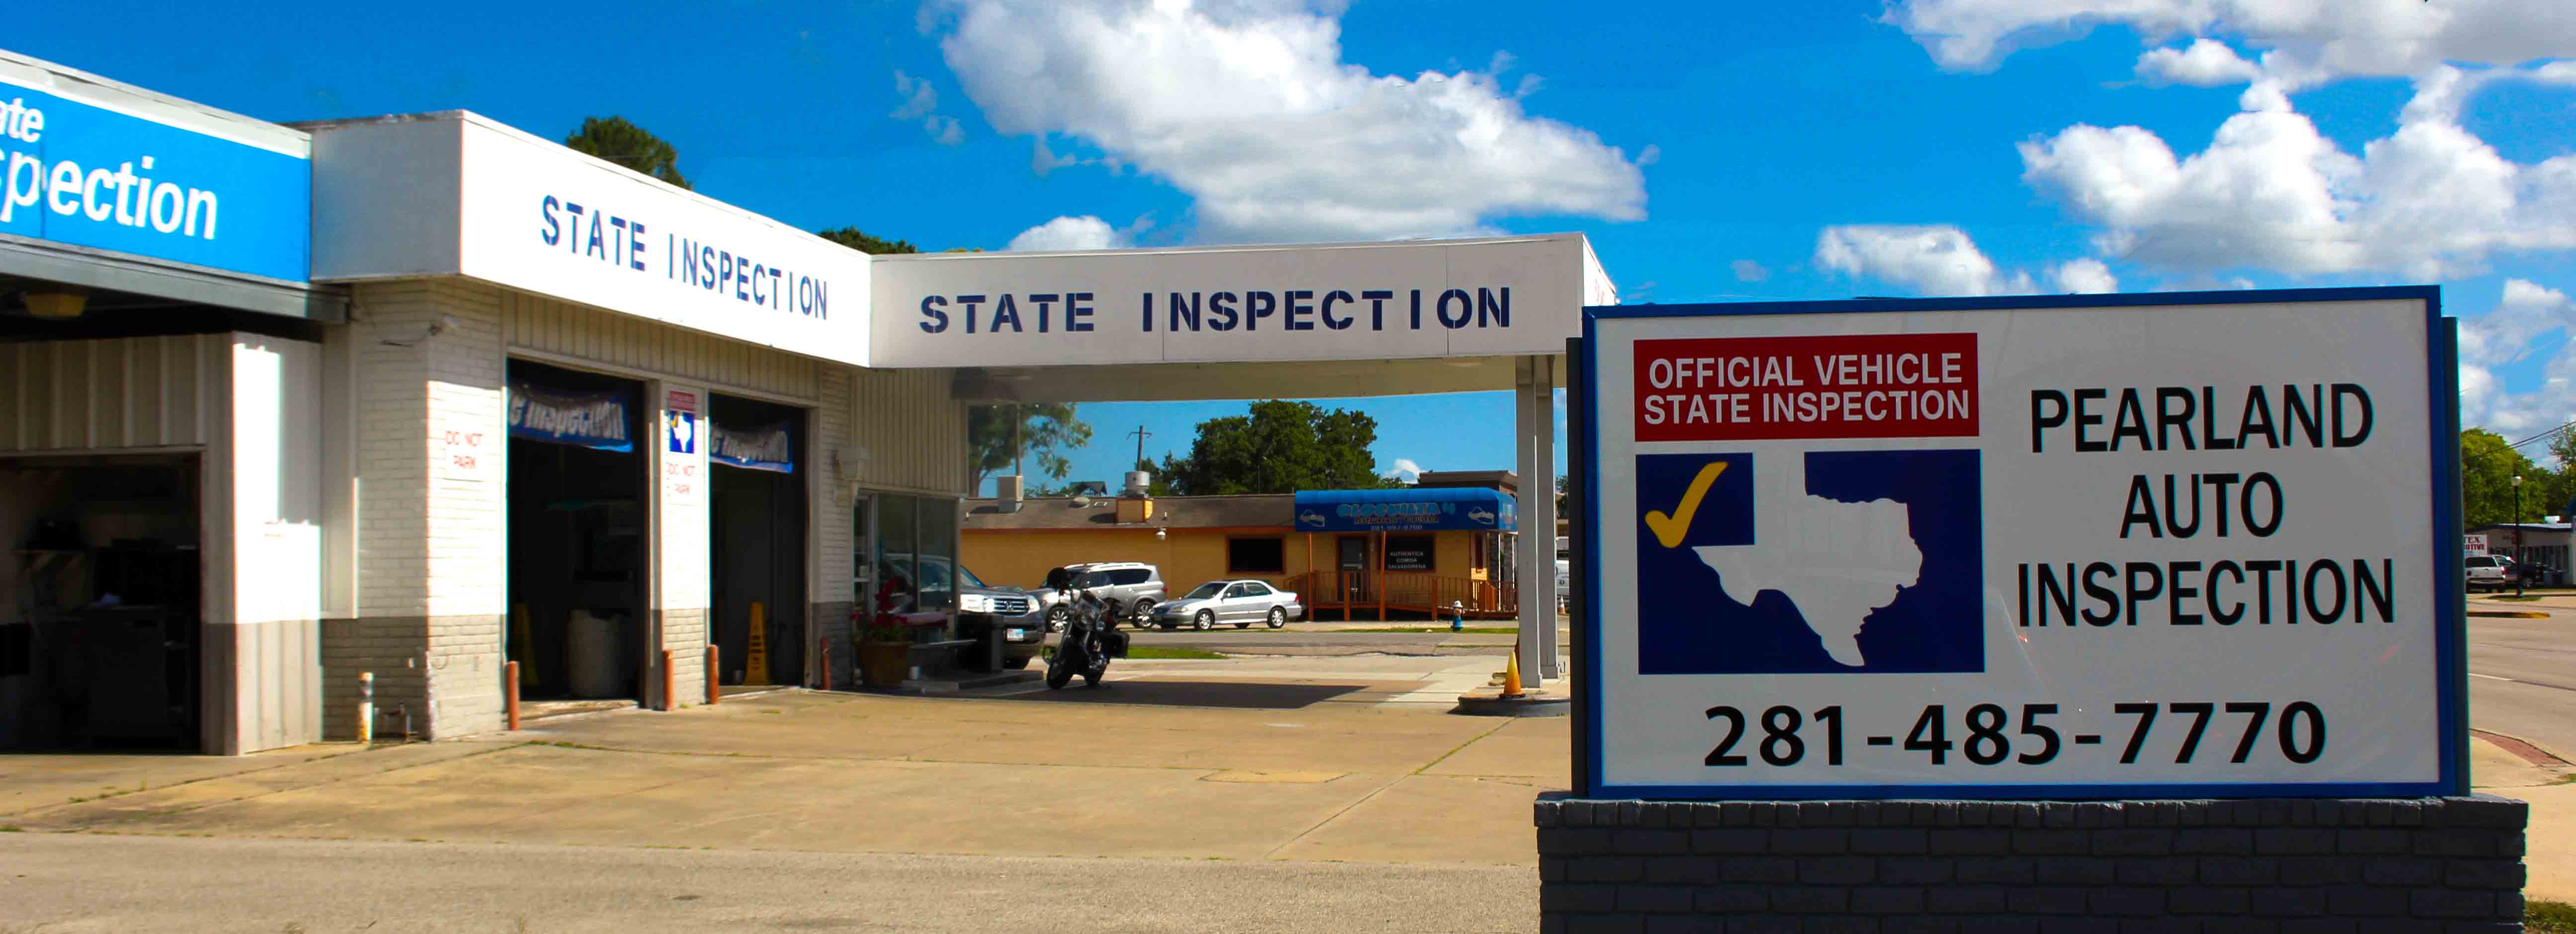 Car State Inspection Near Me - Car Sale and Rentals